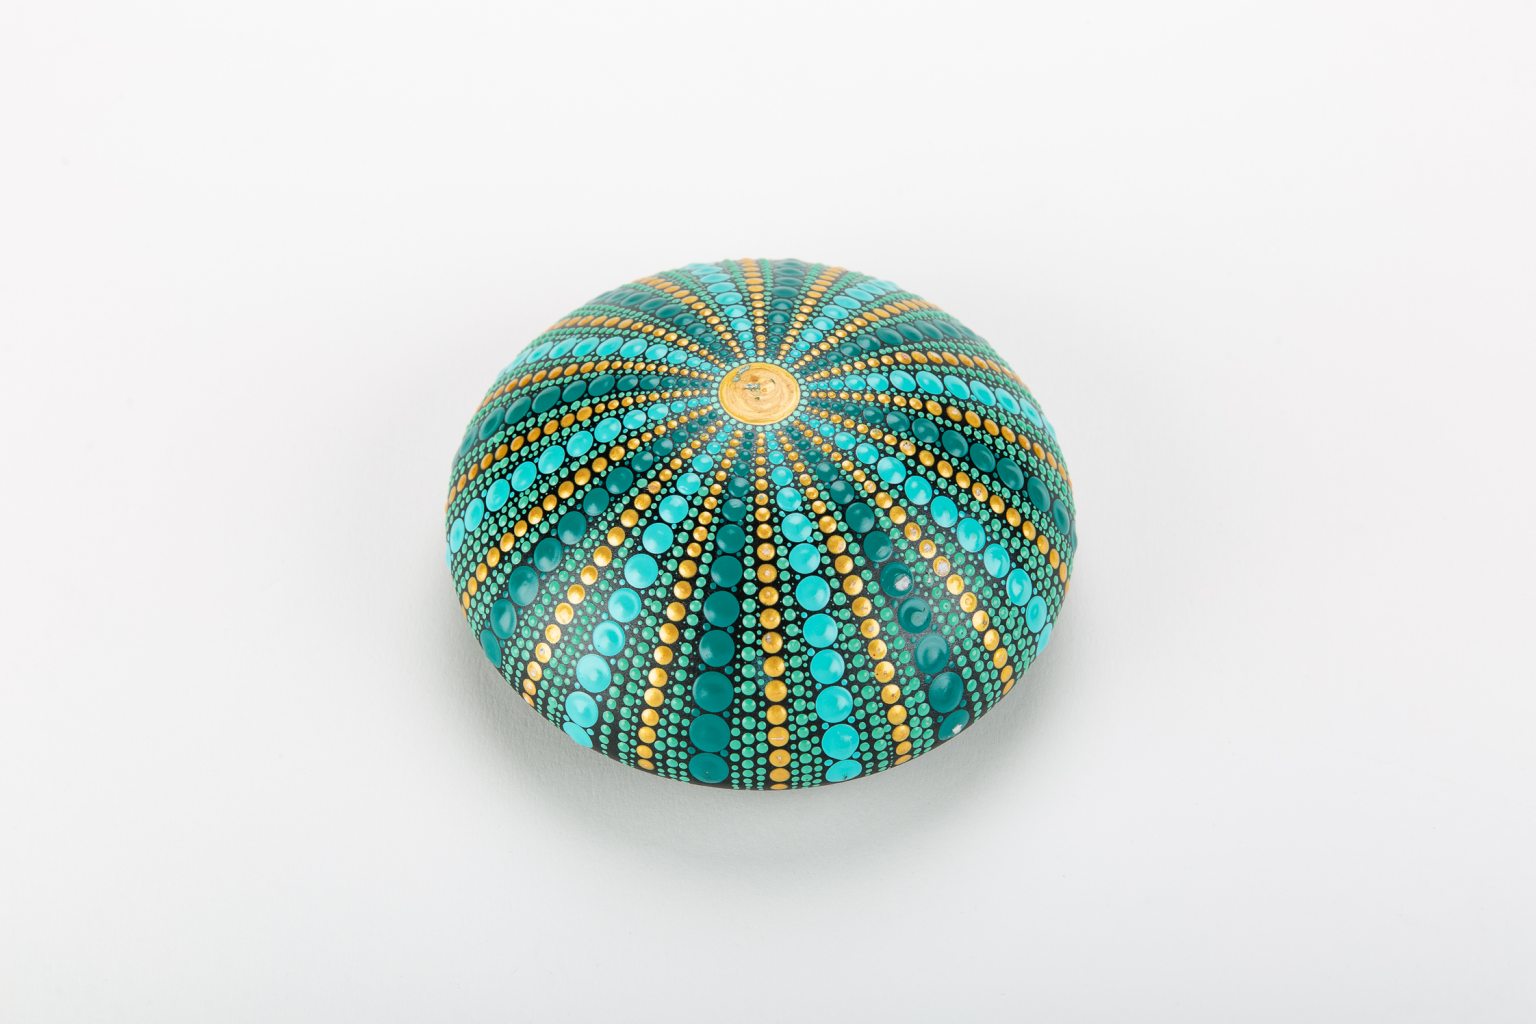 Large turquoise sea urchin - paperweight